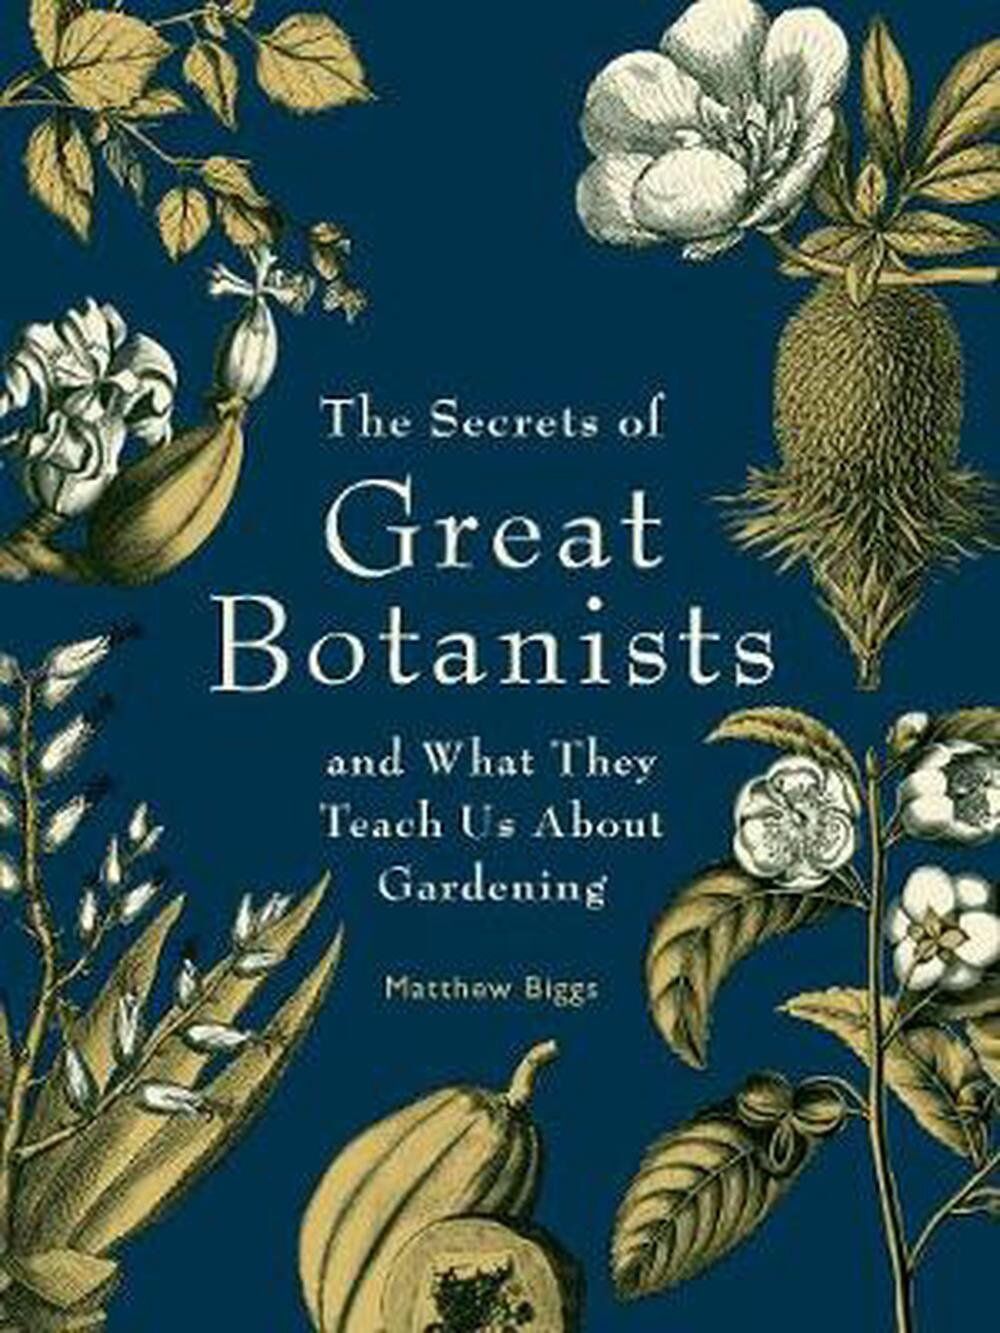 Book:    The Secrets of Great Botanists And What They Teach Us About Gardening